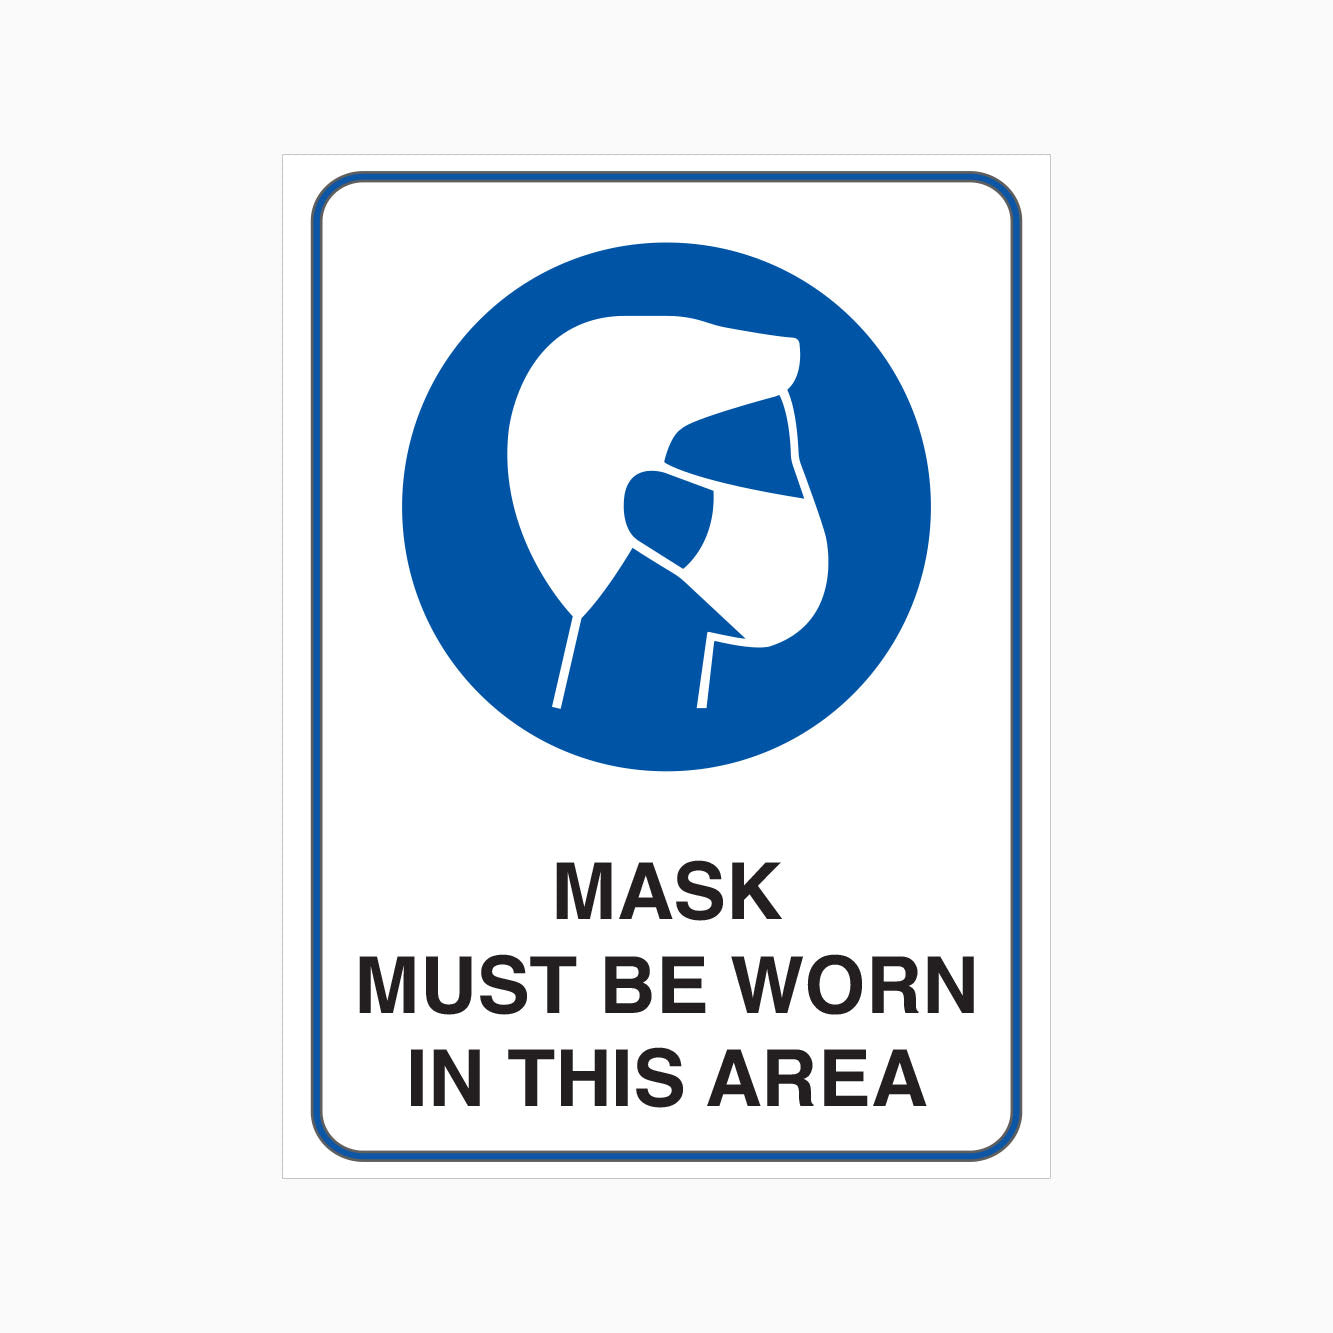 MASK MUST BE WORN IN THIS AREA SIGN - GET SIGNS